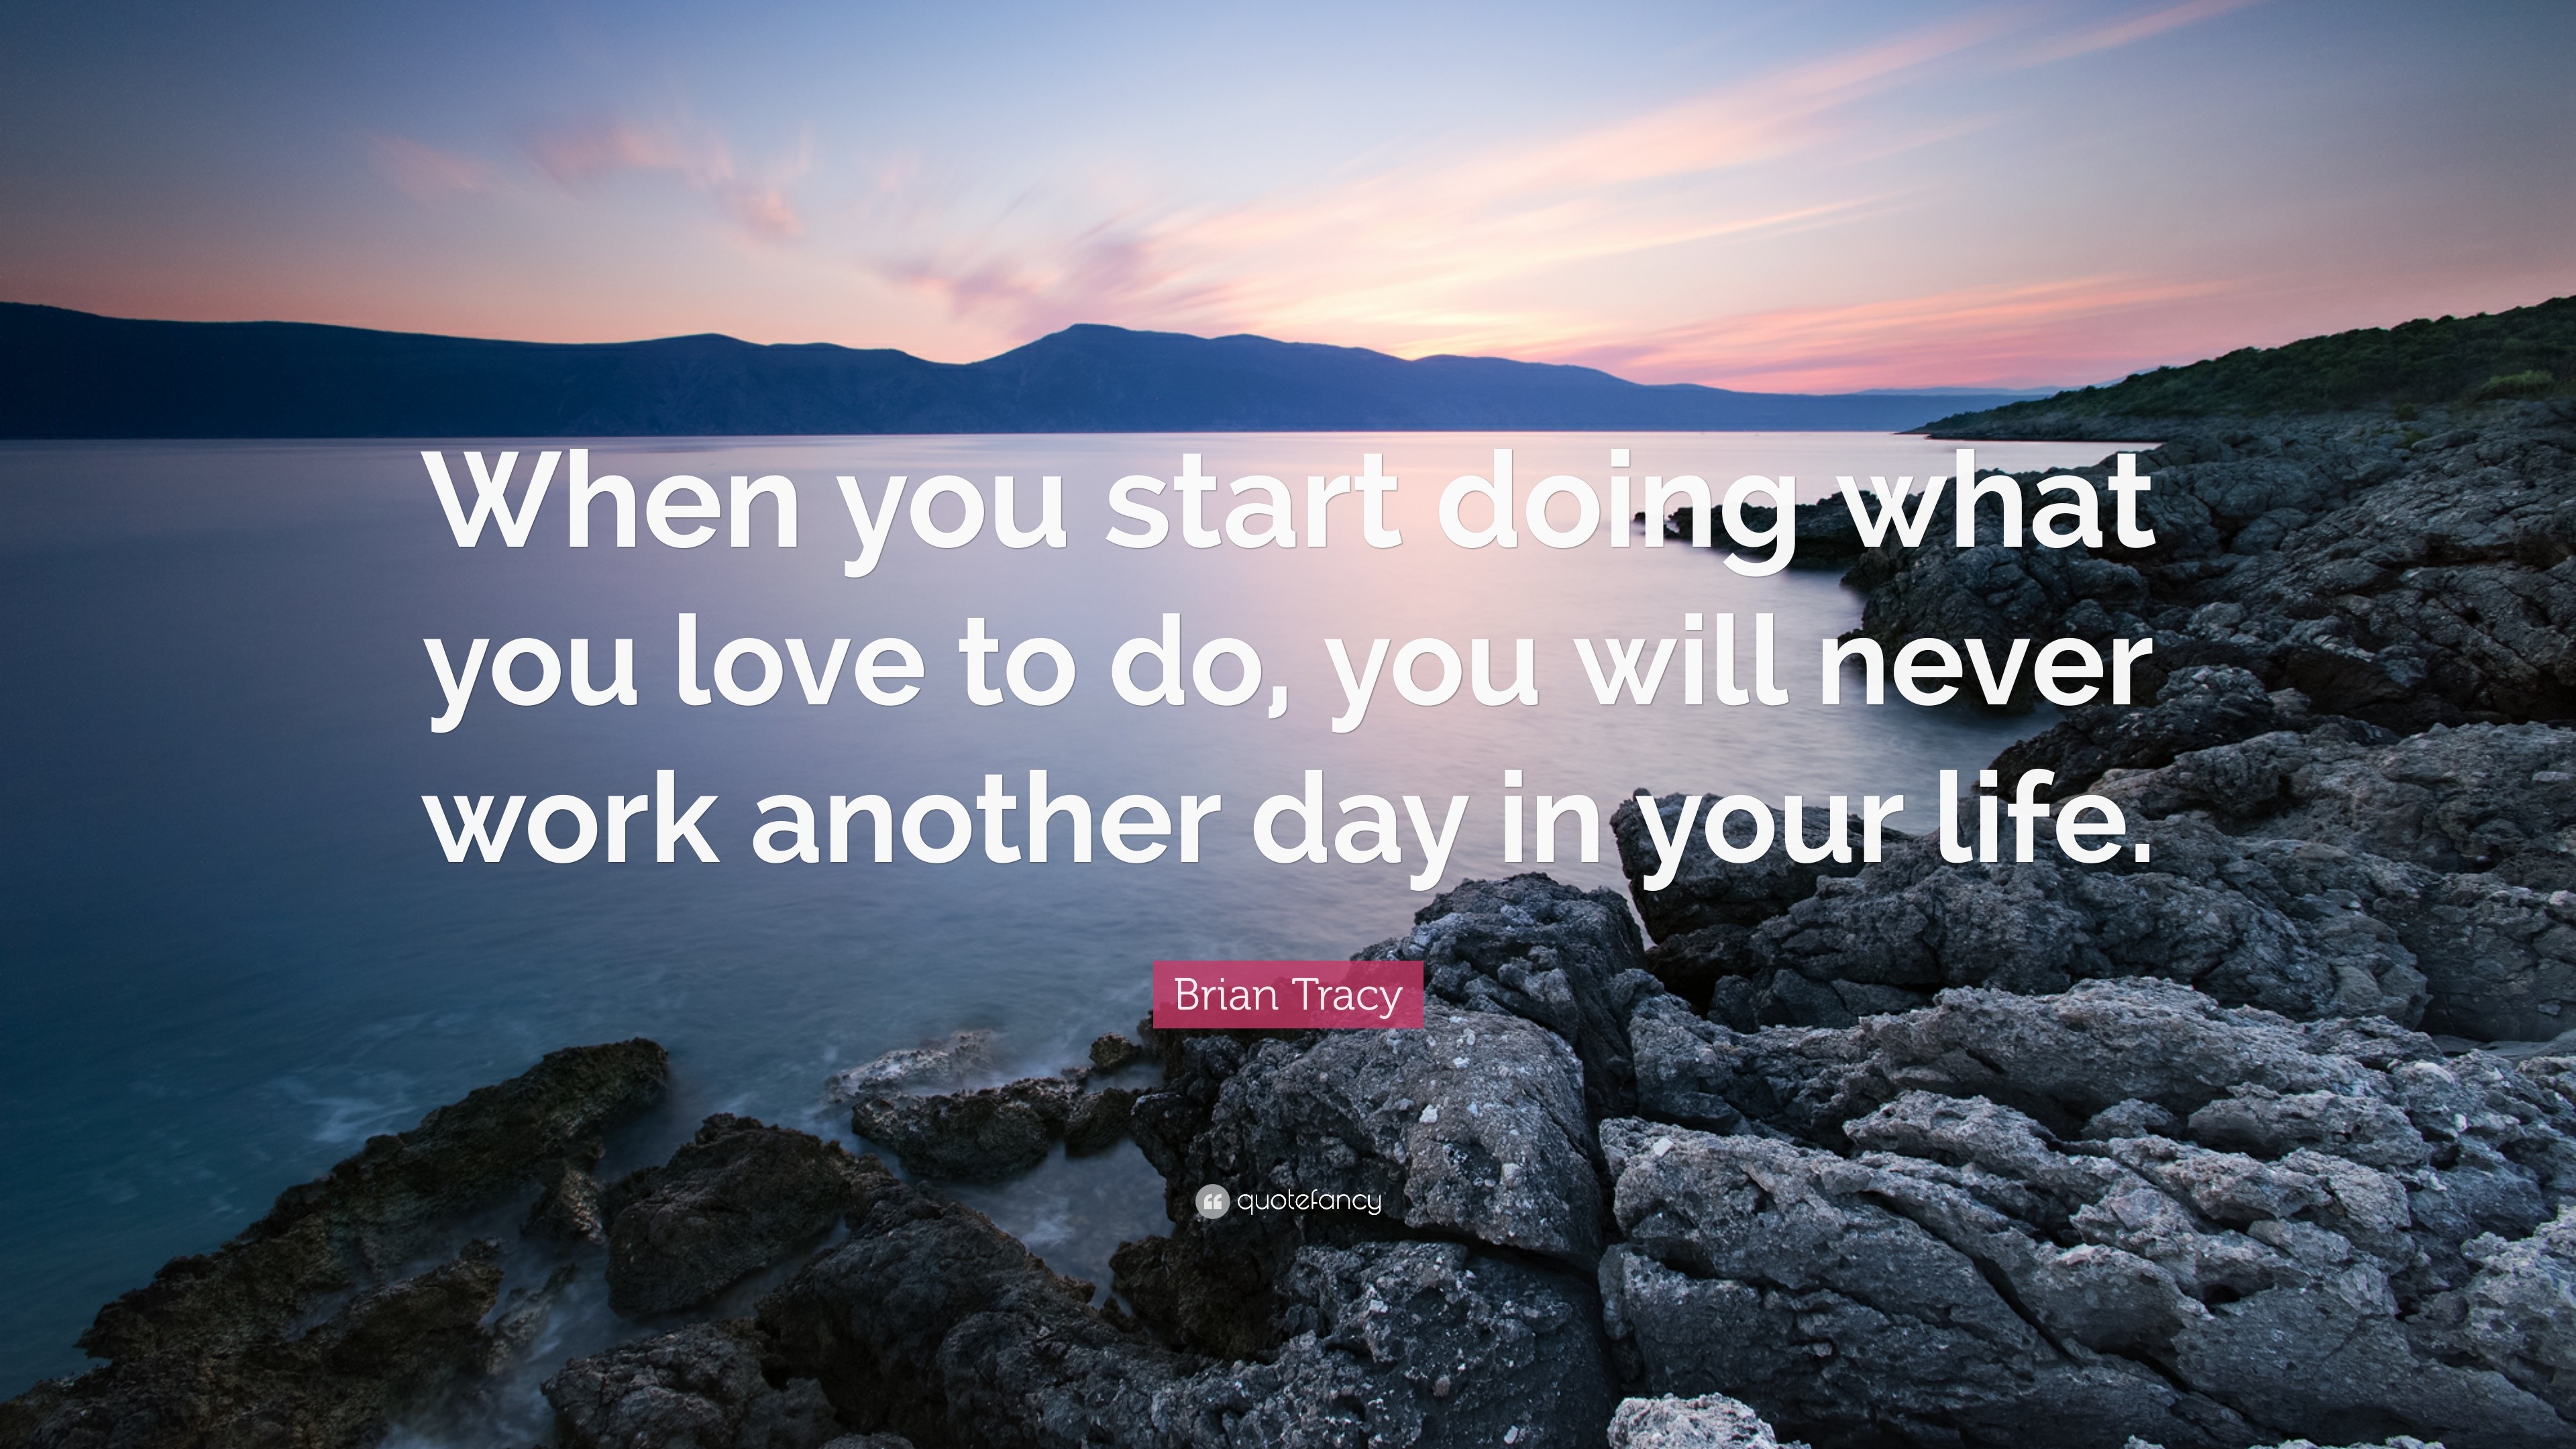 Brian Tracy Quote “When you start doing what you love to do you